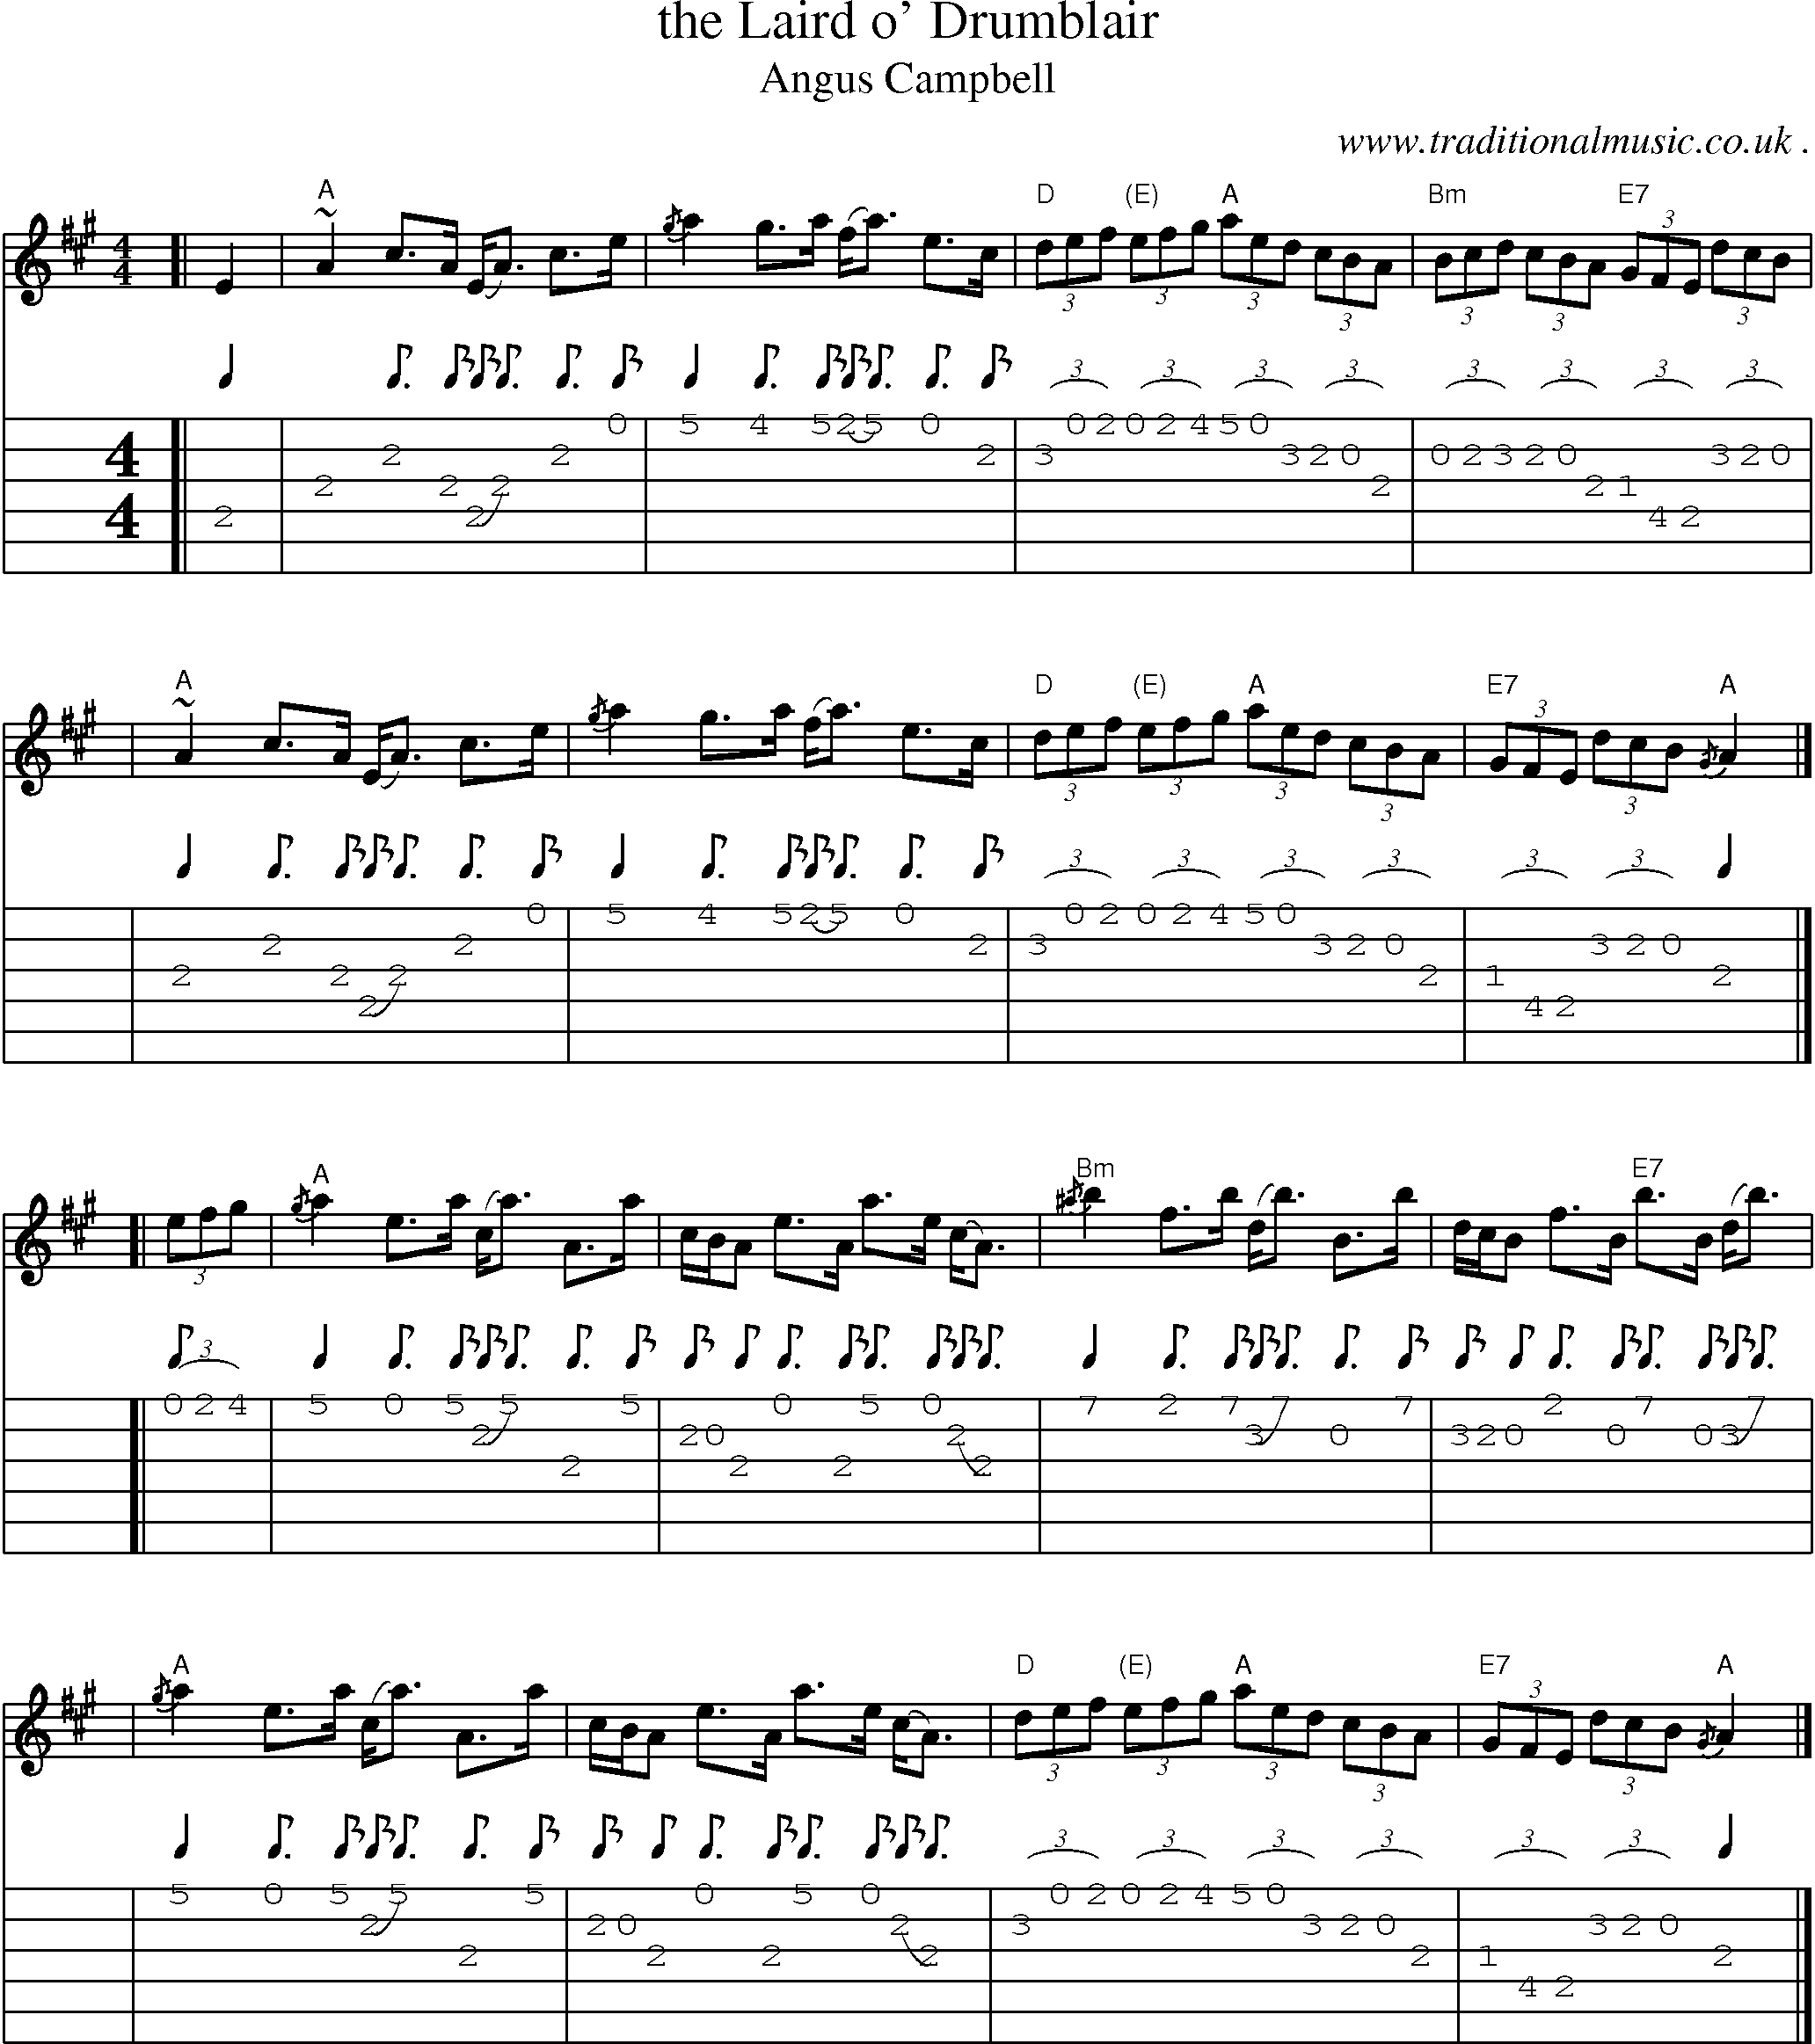 Sheet-music  score, Chords and Guitar Tabs for The Laird O Drumblair